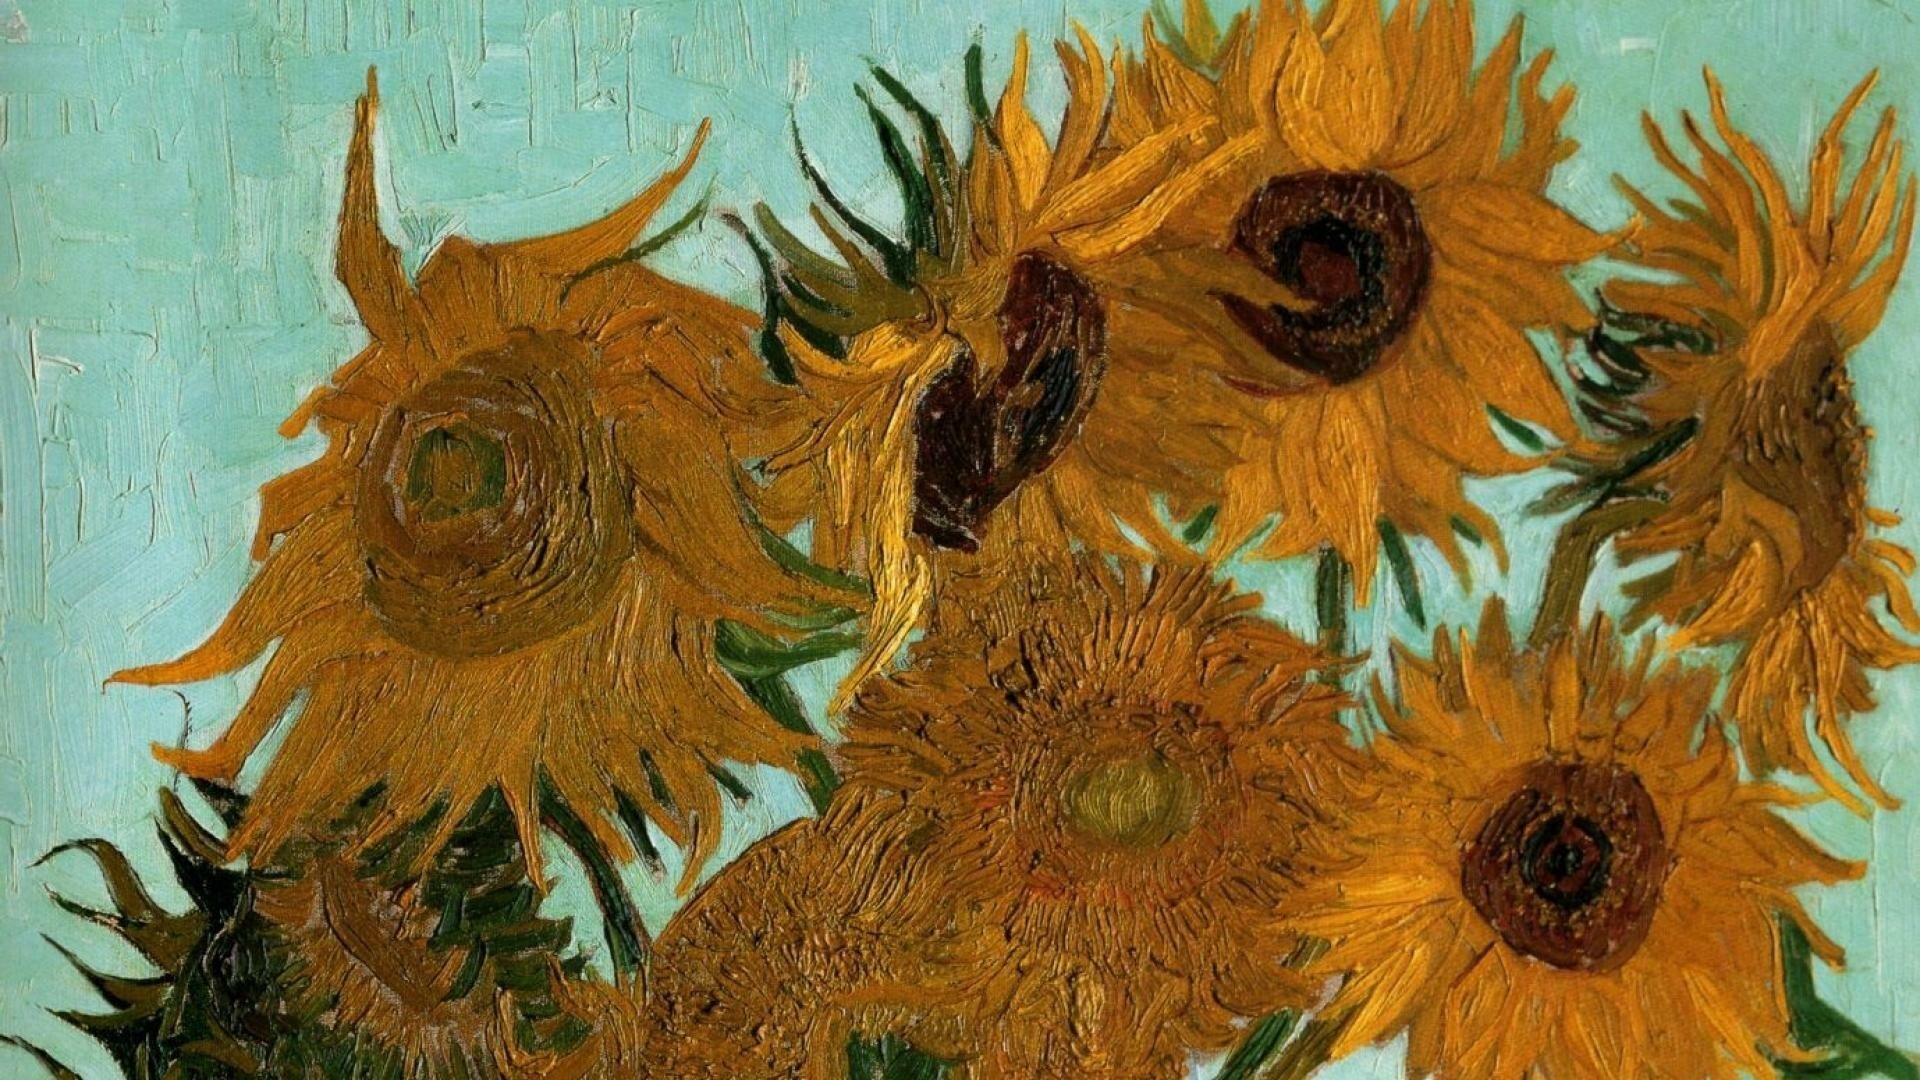 Vincent van Gogh, HD wallpapers, PC and mobile, Artistic images, 1920x1080 Full HD Desktop